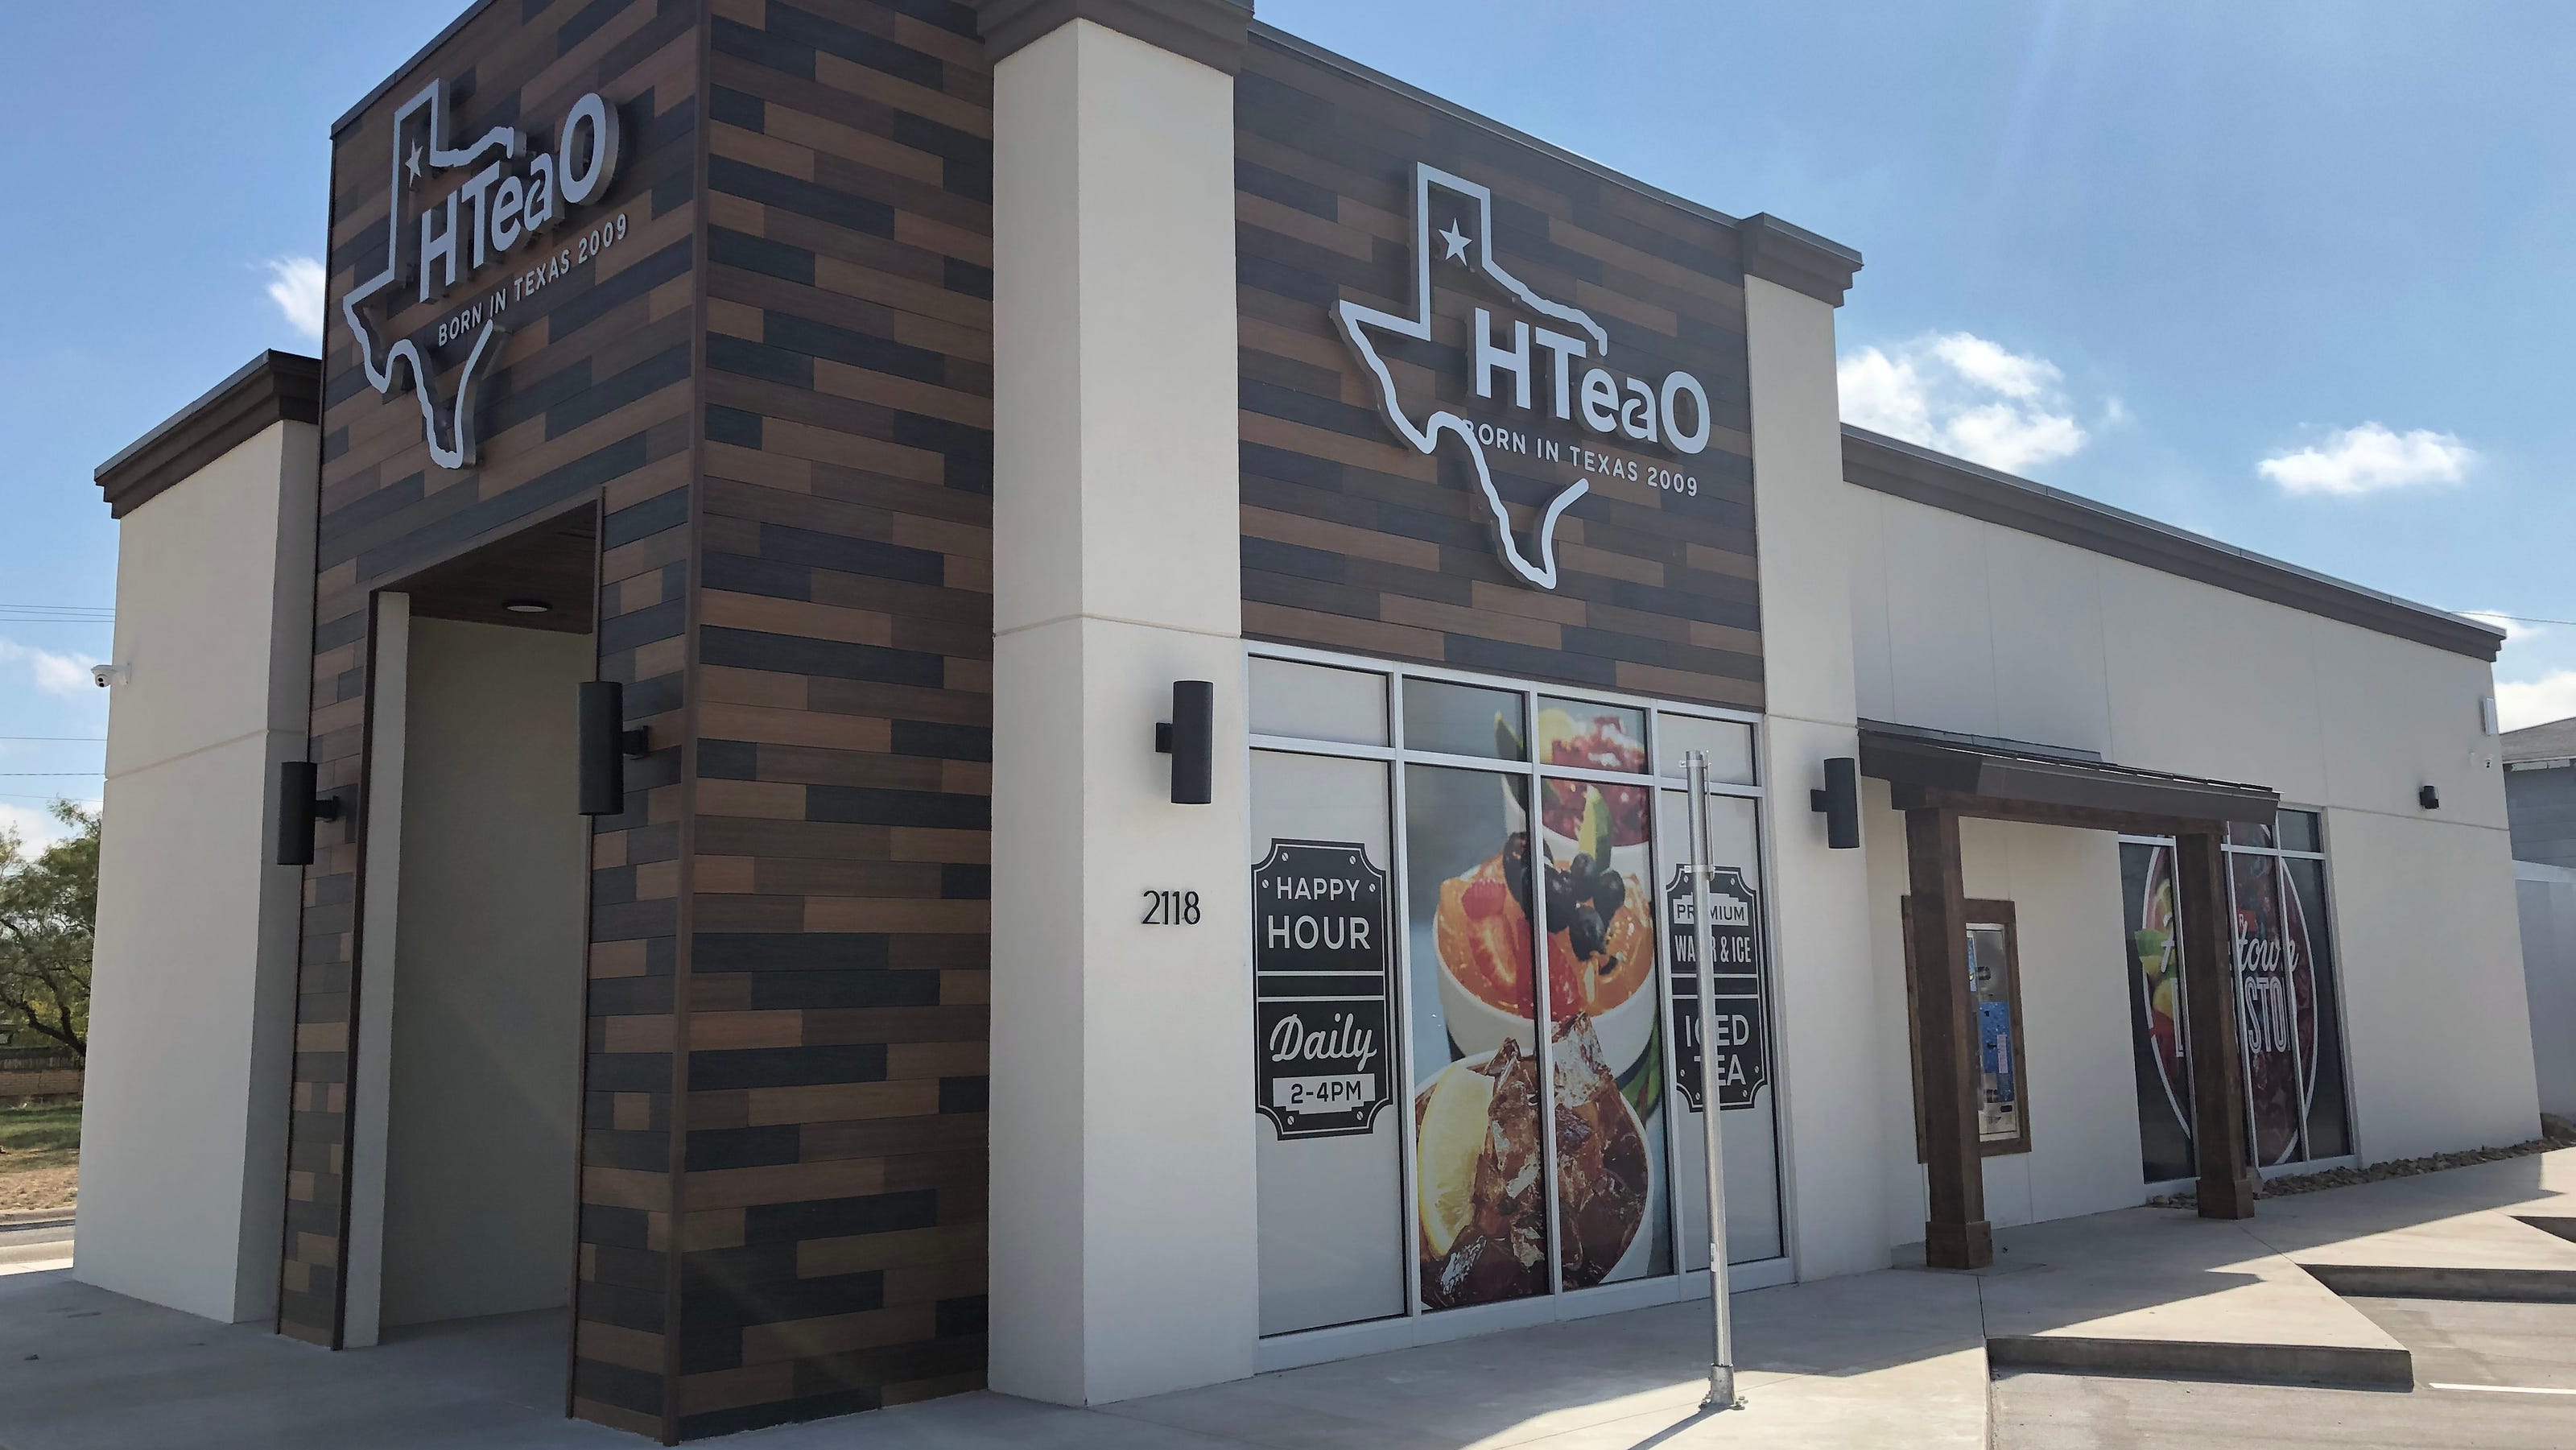 HTeaO planning to open December 2020 in San Angelo